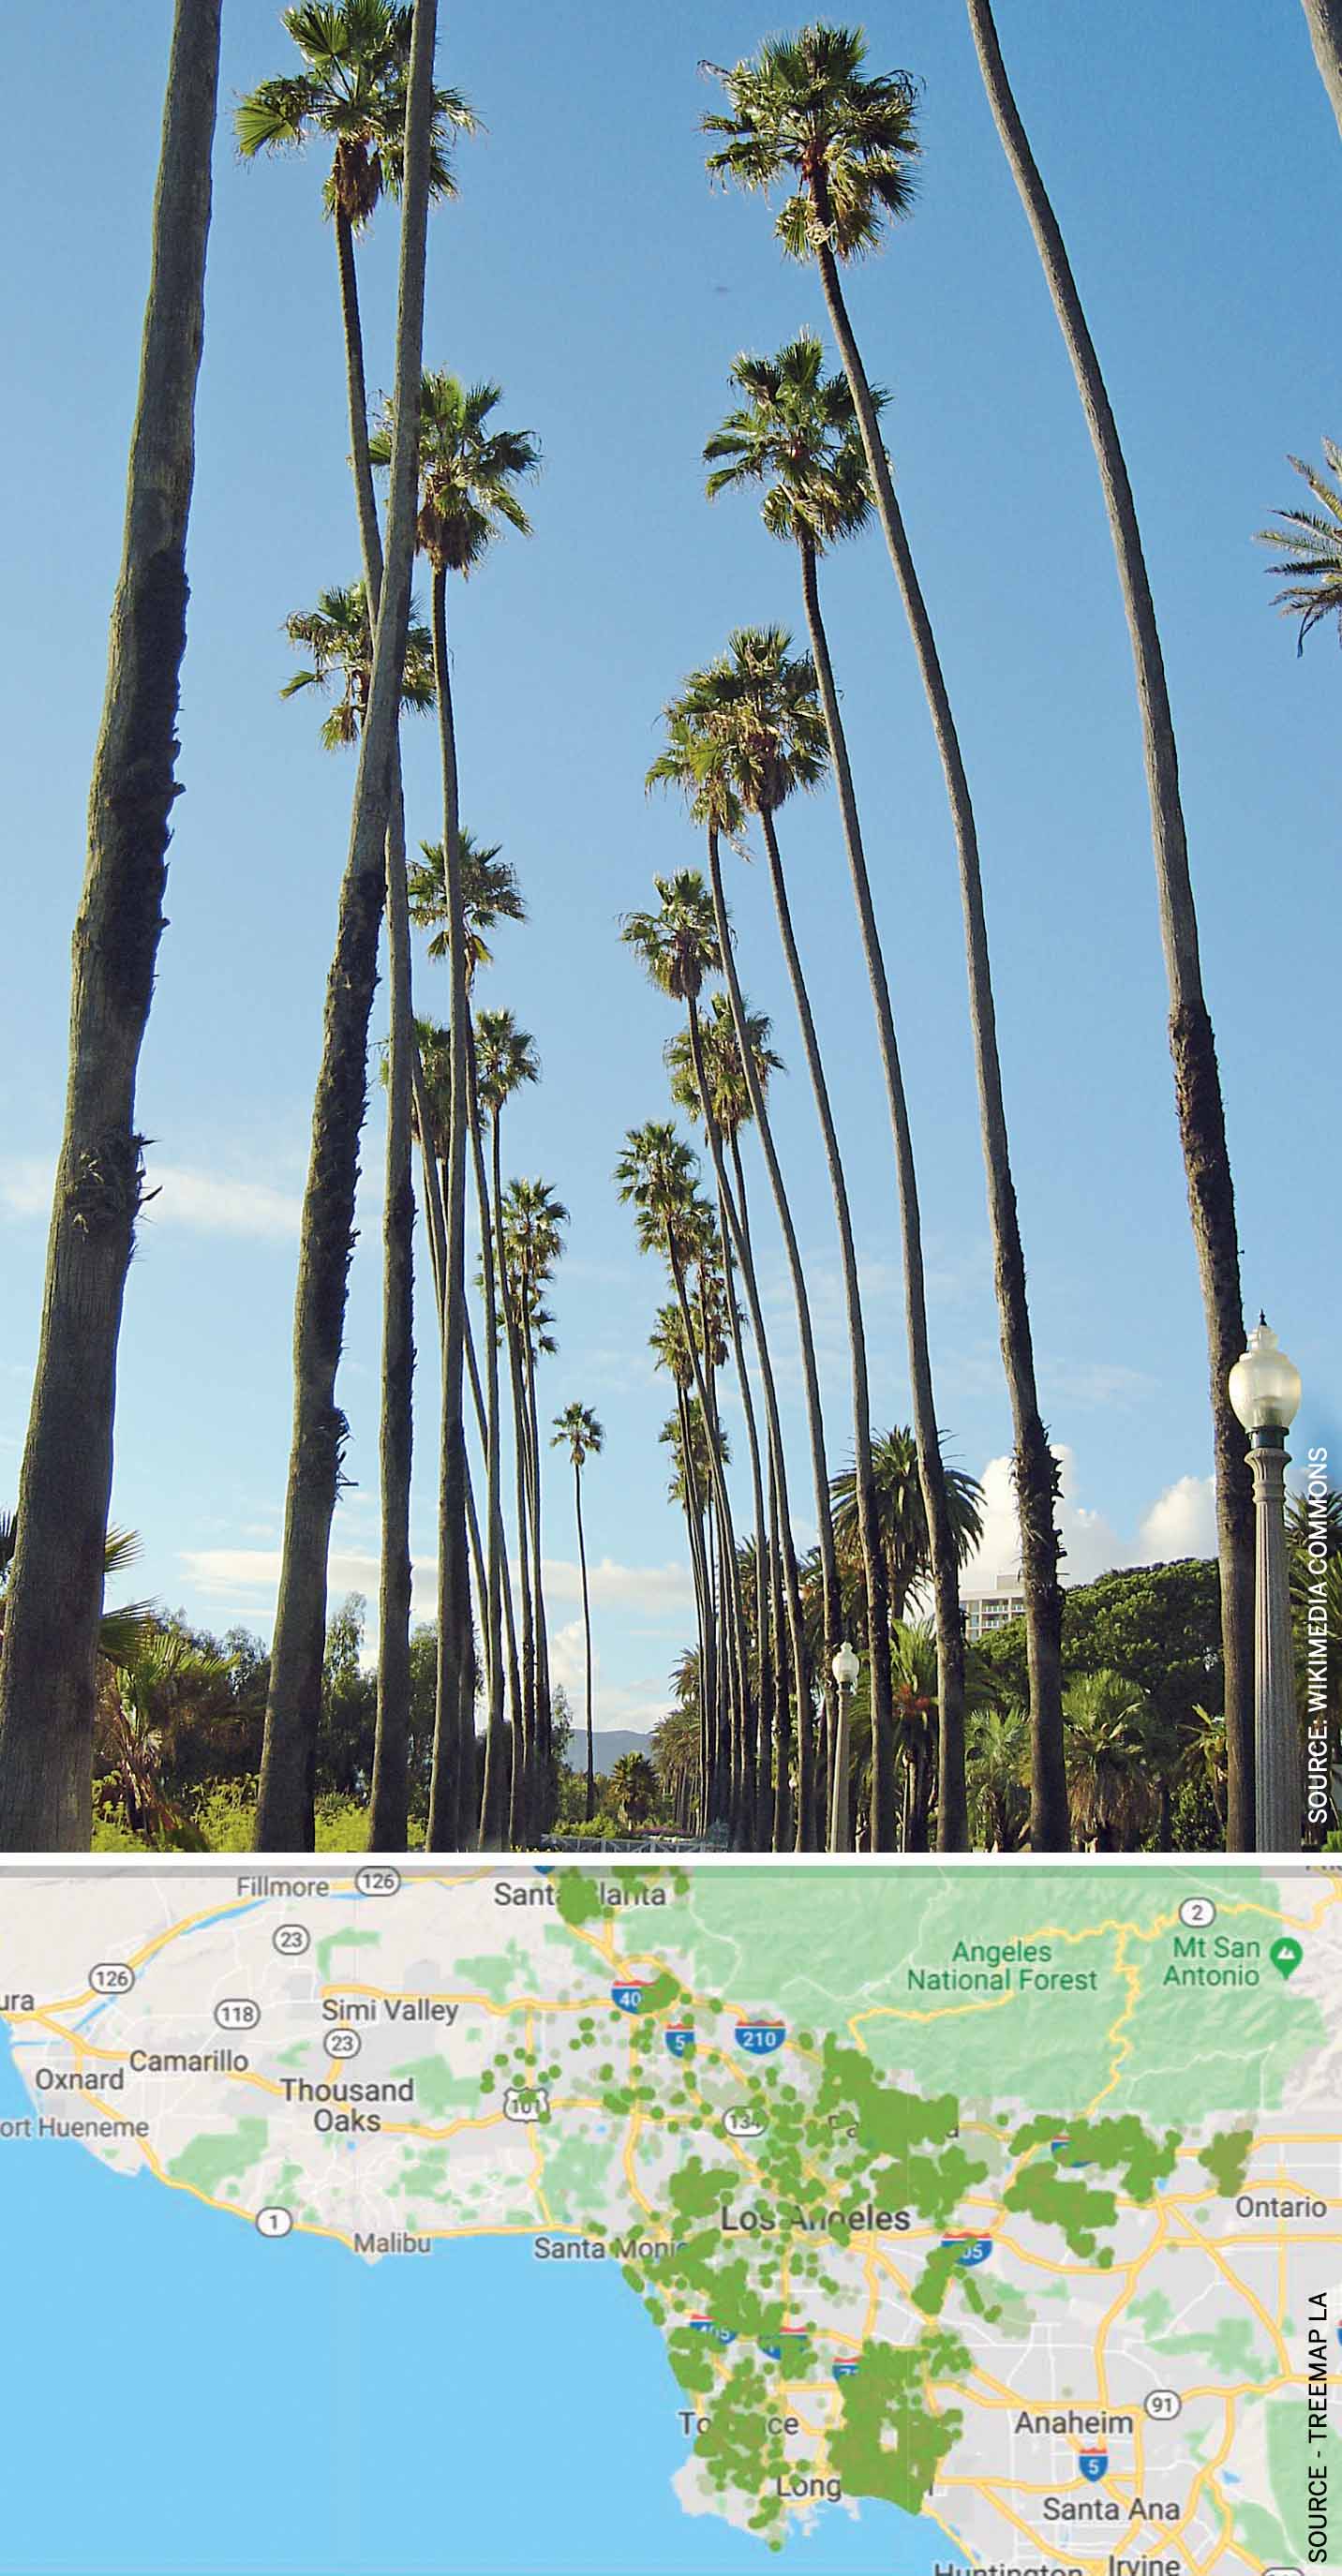 immigrant-trees-of-los-angeles-mexican-fan-palm-santa-monica-mapping-population-palms-los-angeles